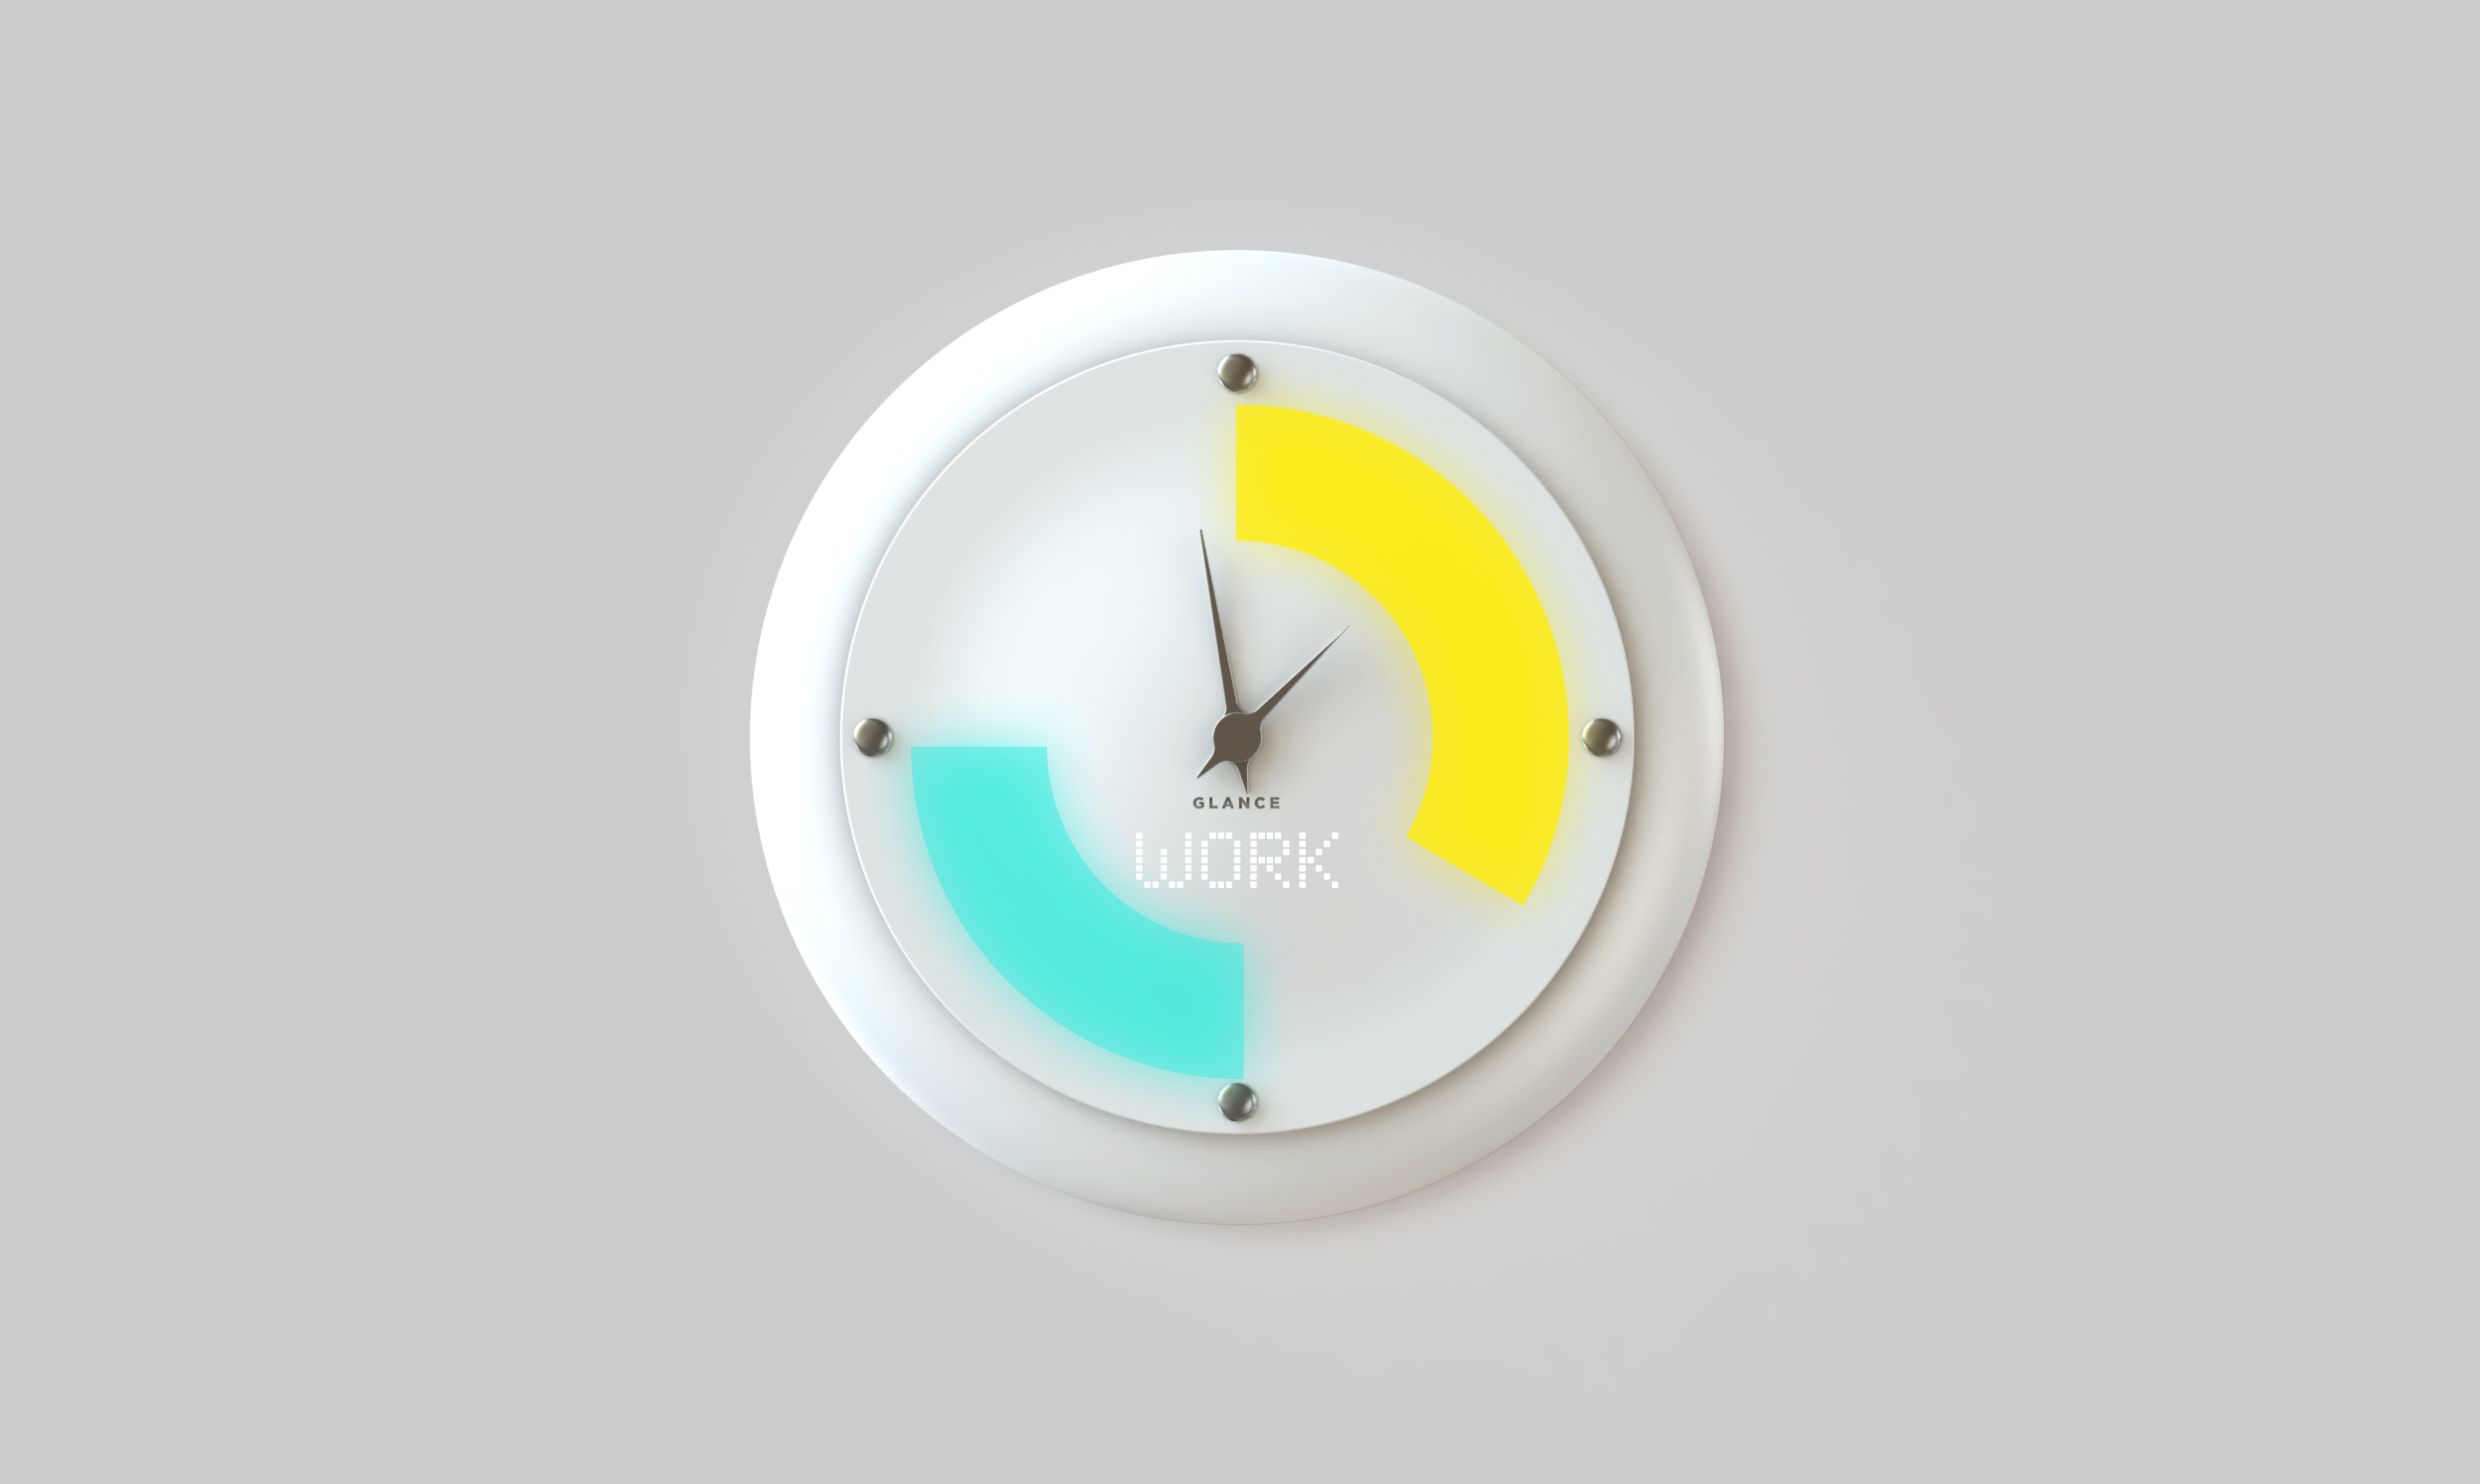 Meet Glance, A Smart Wall Clock That Displays More Than The Time ...